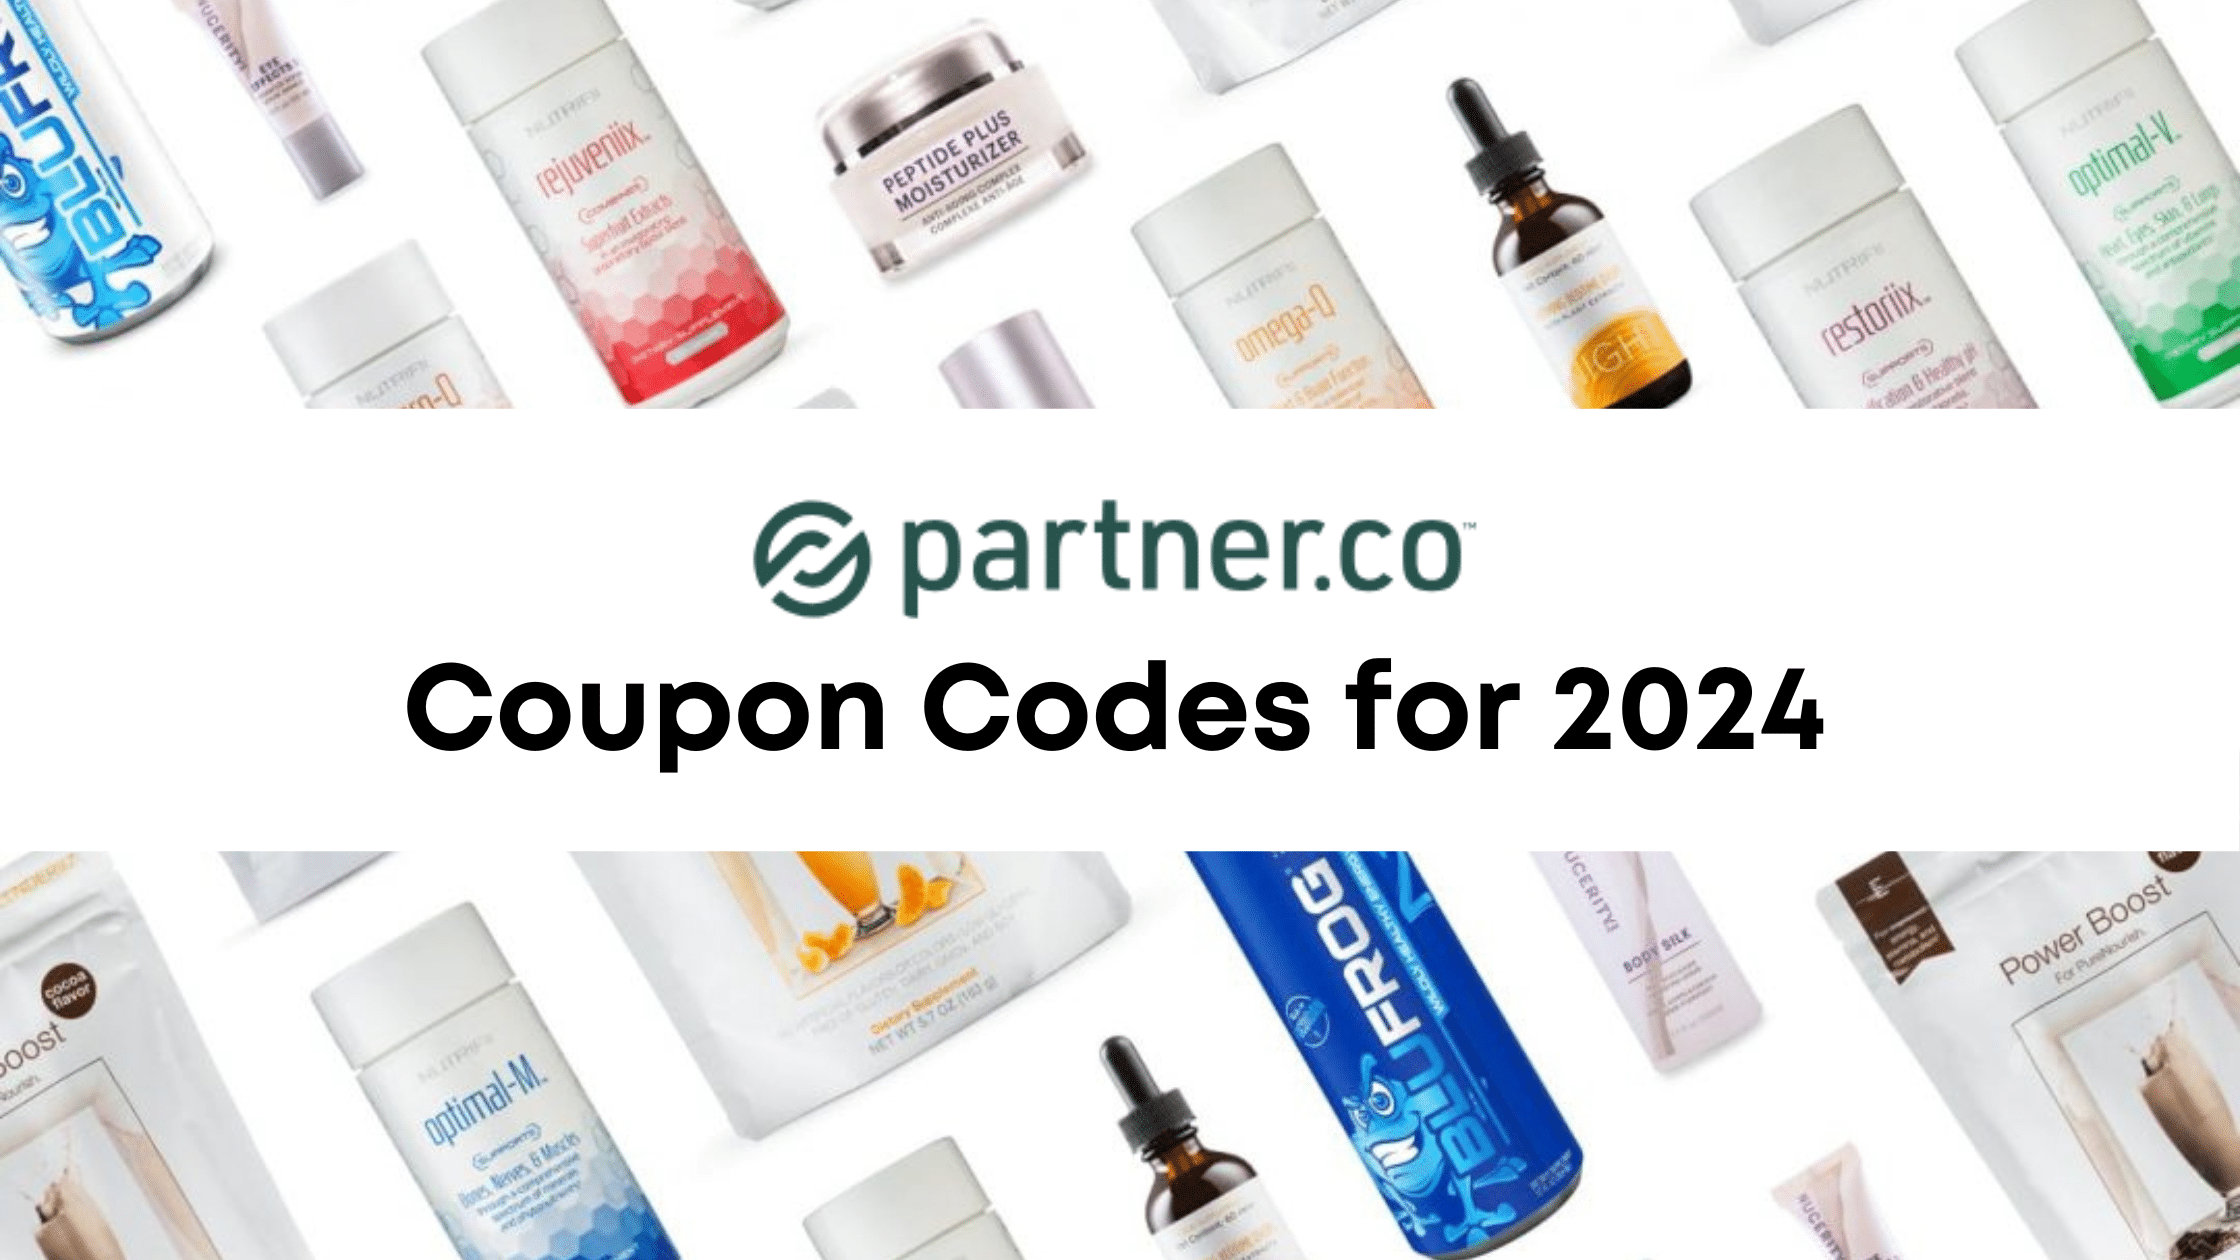 Partner.co Coupon Codes